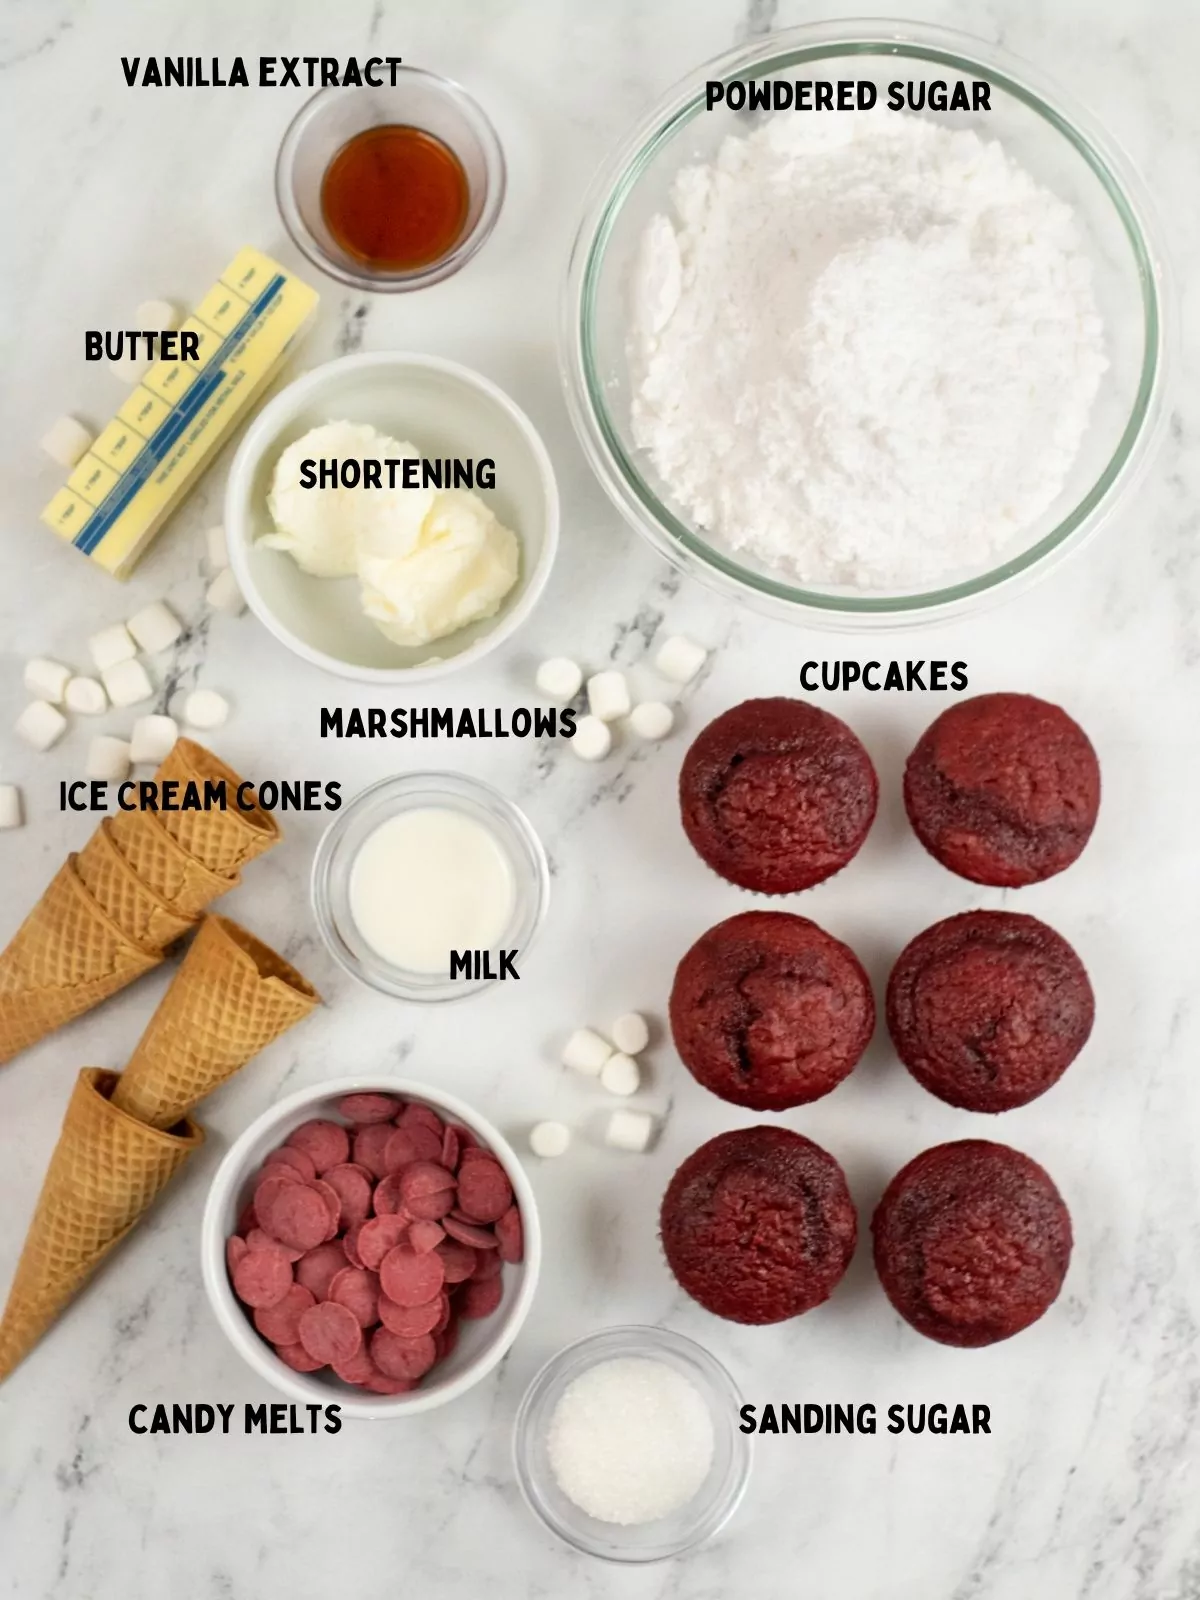 Ingredients for Santa hat cupcakes made with ice cream cones and red candy melts.